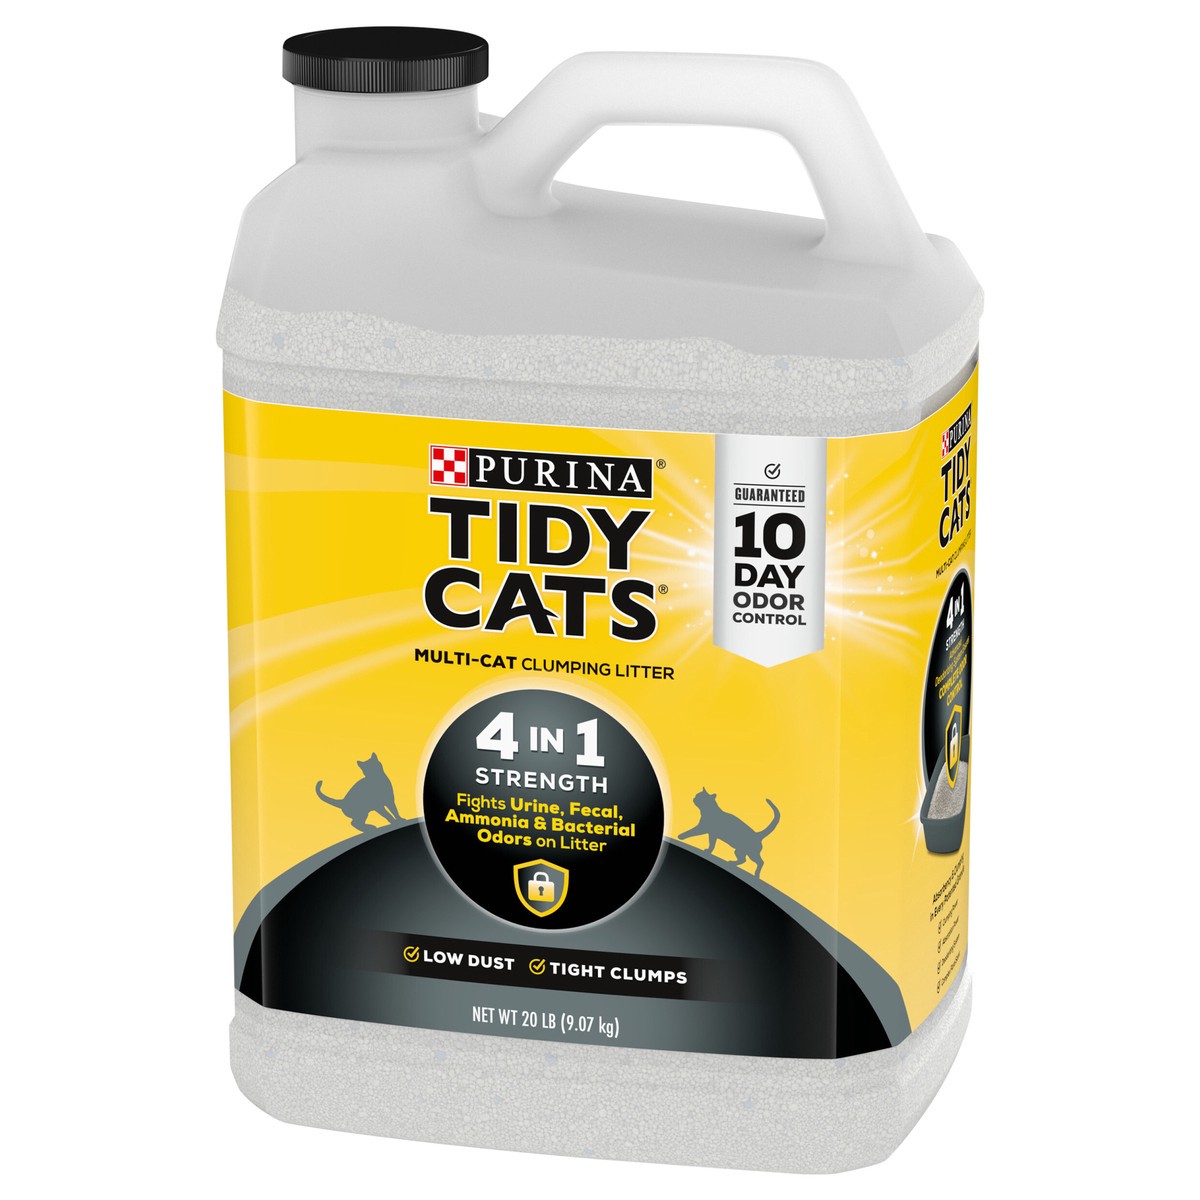 slide 8 of 9, Tidy Cats Purina Tidy Cats 4-in-1 Strength Multi-Cat Clumping Litter - 20lbs, 20 lb